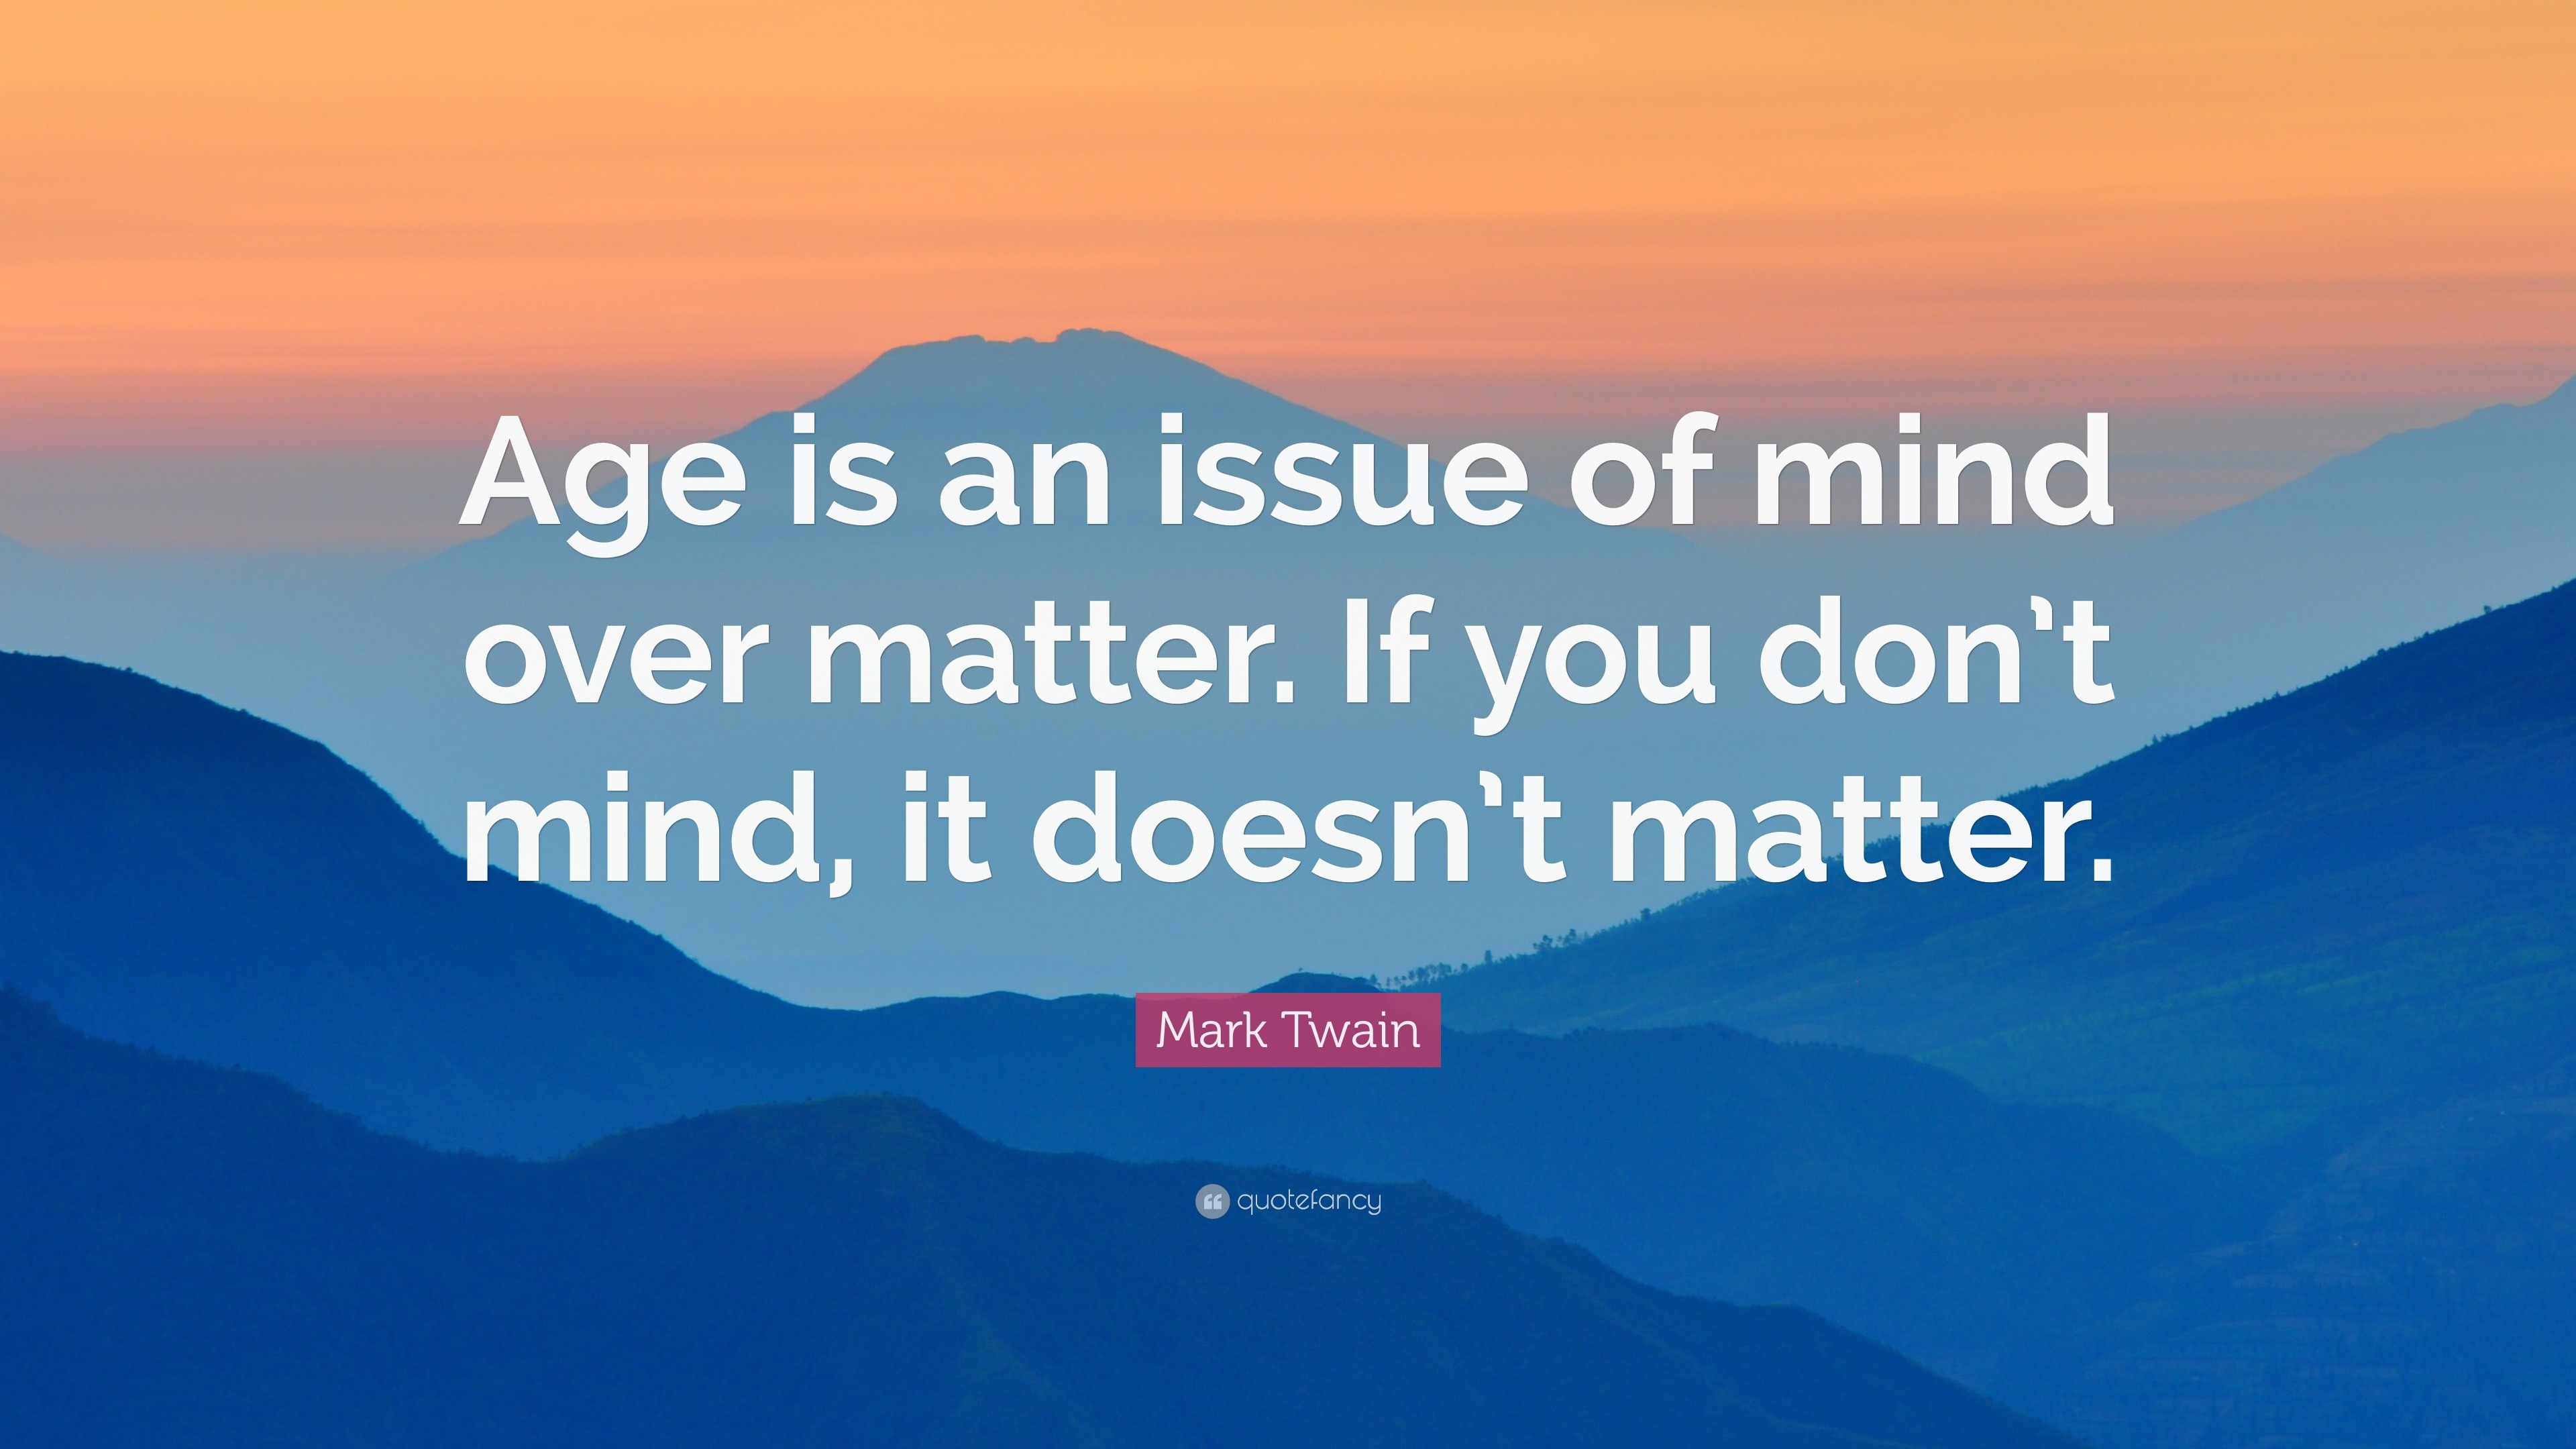 Mark Twain Quote: “Age is an issue of mind over matter. If you don’t